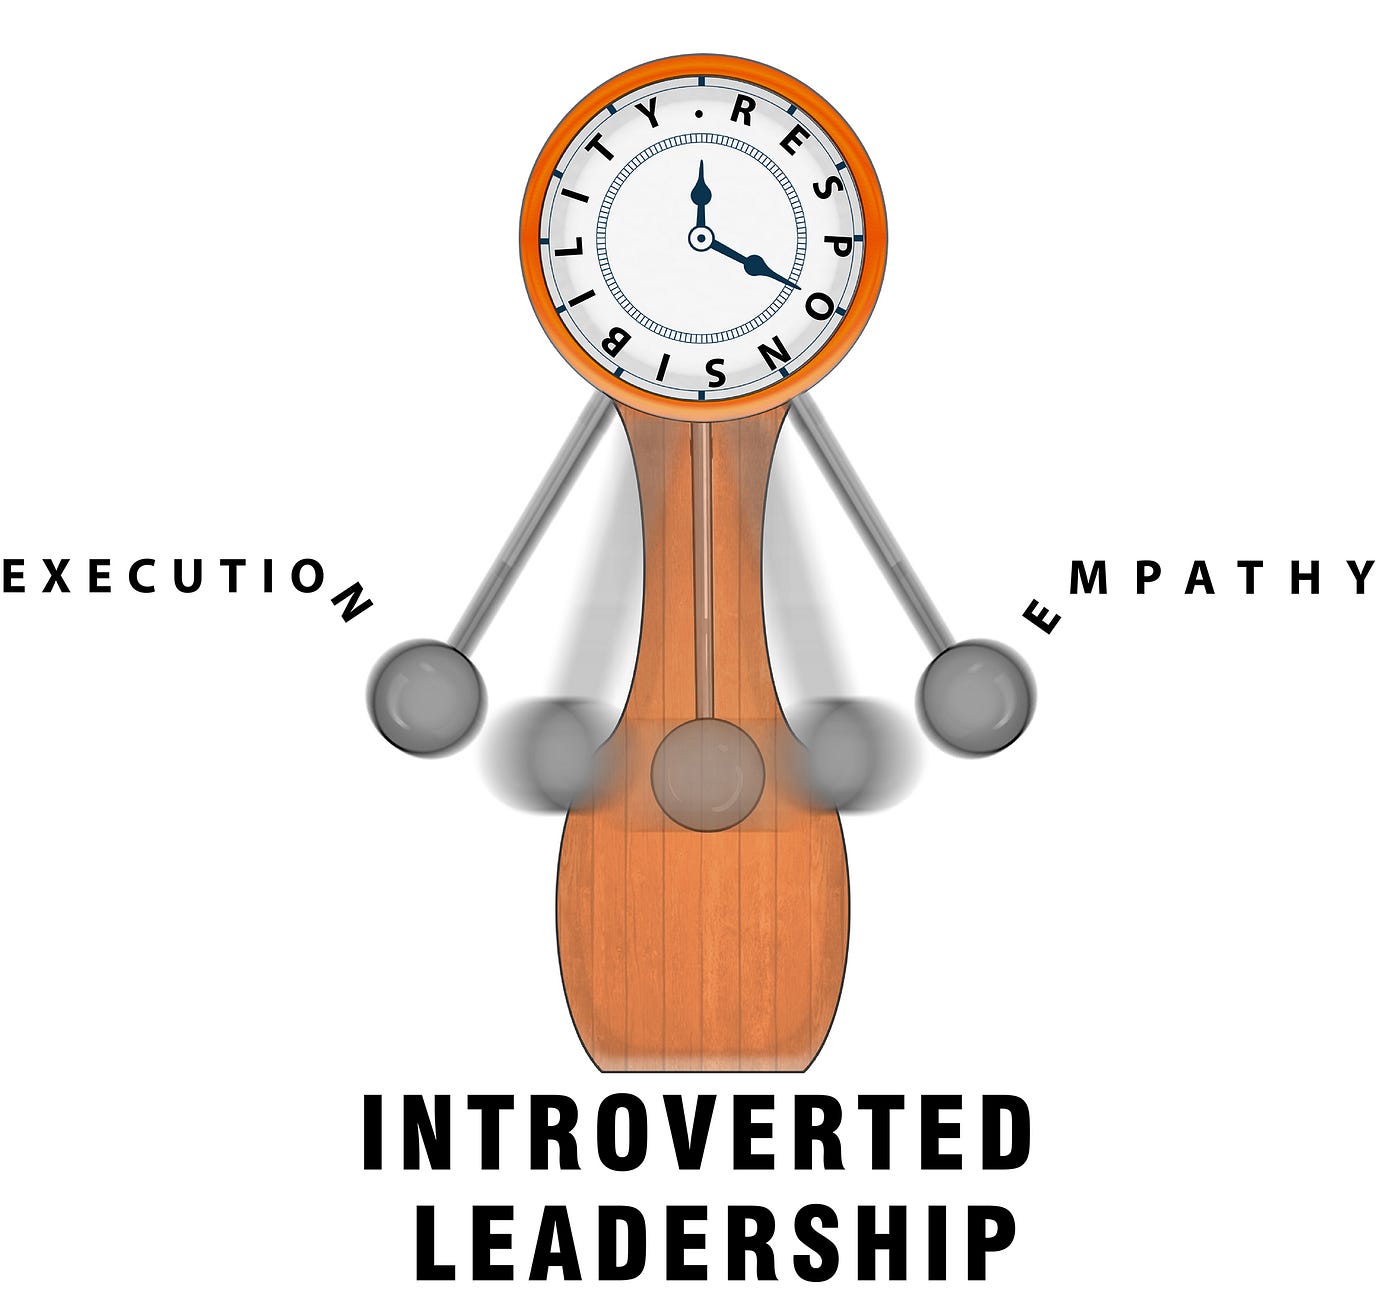 A Pendulum Model of Introverted Leadership, by Dee Kayalar